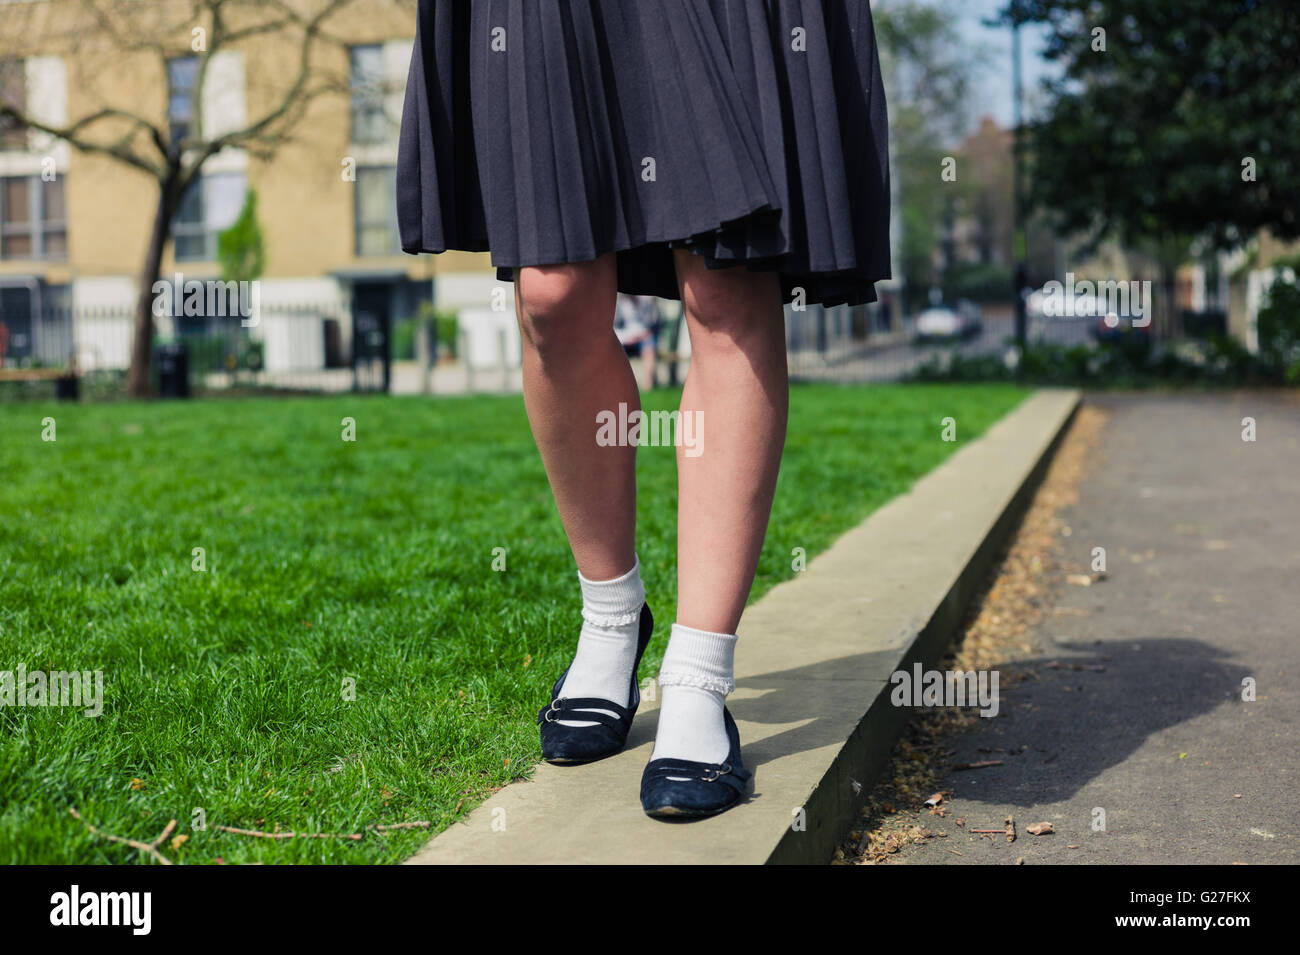 A young woman wearing a skirt is walking in a park by the green grass ...